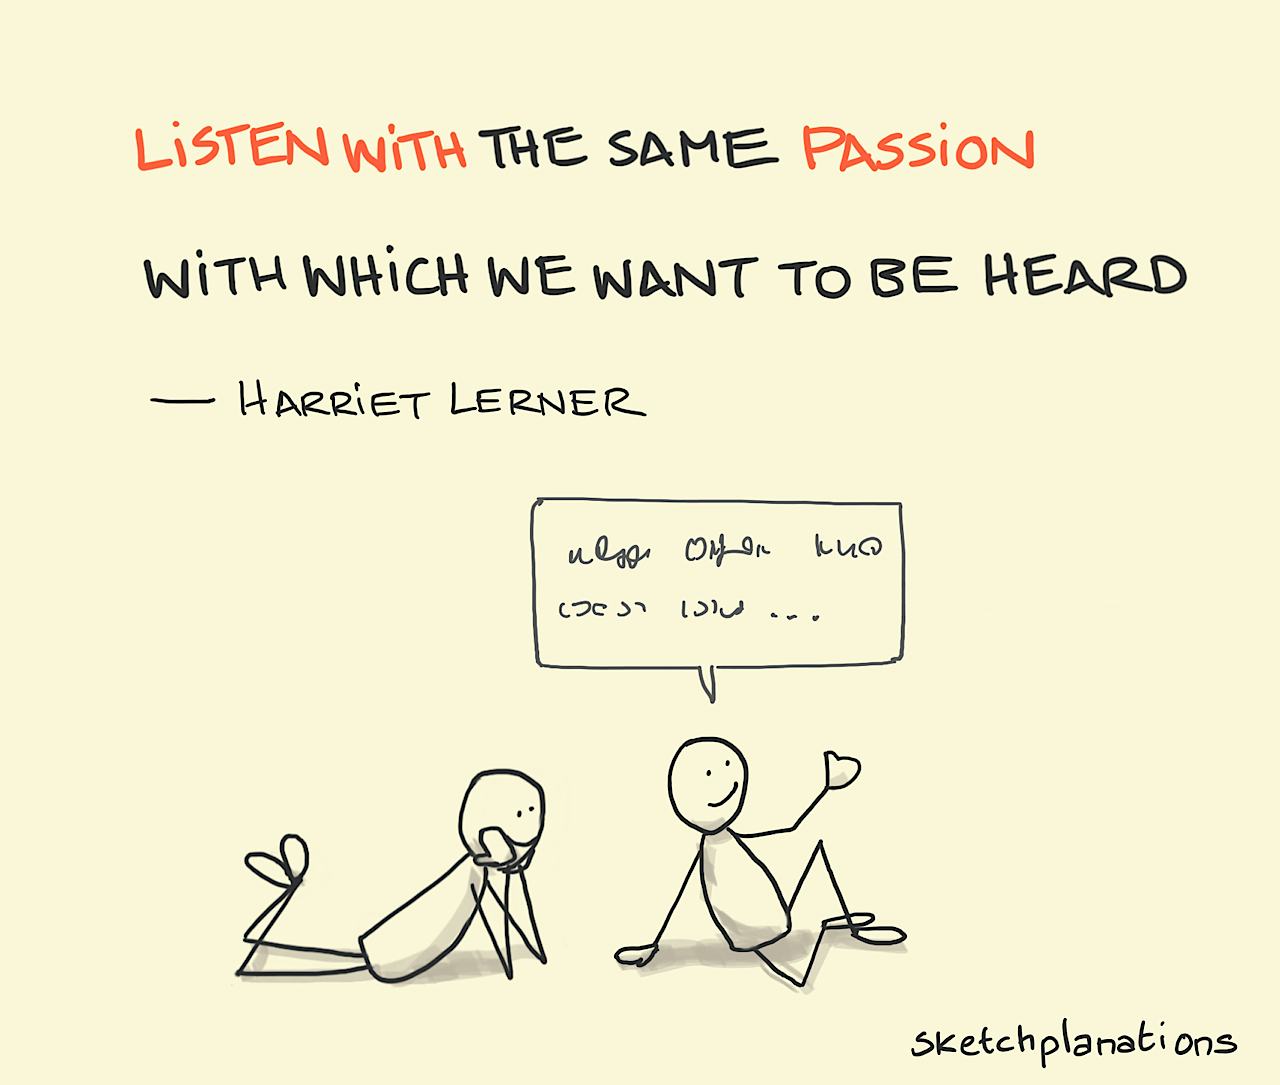 Listen with passion - Sketchplanations